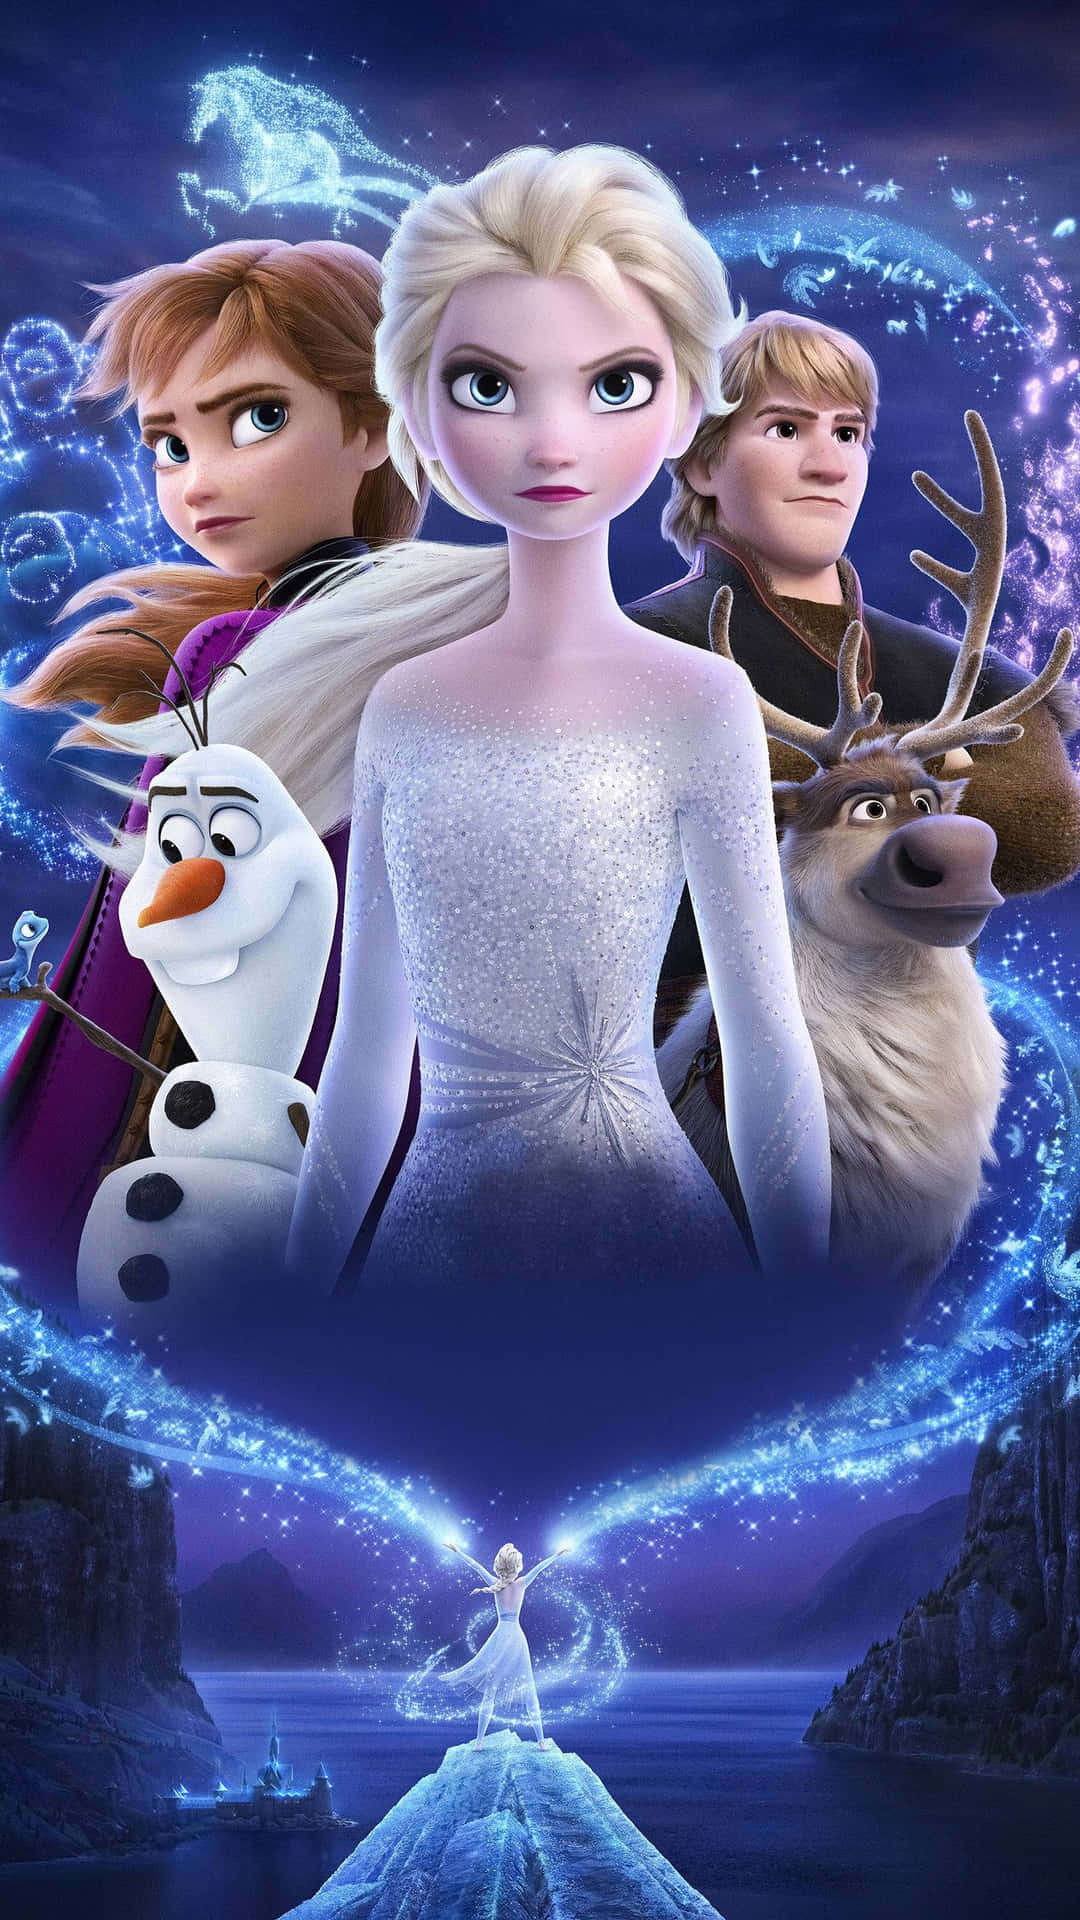 Majestic Journey Of Sisters - 'frozen 2' Animated Adventure